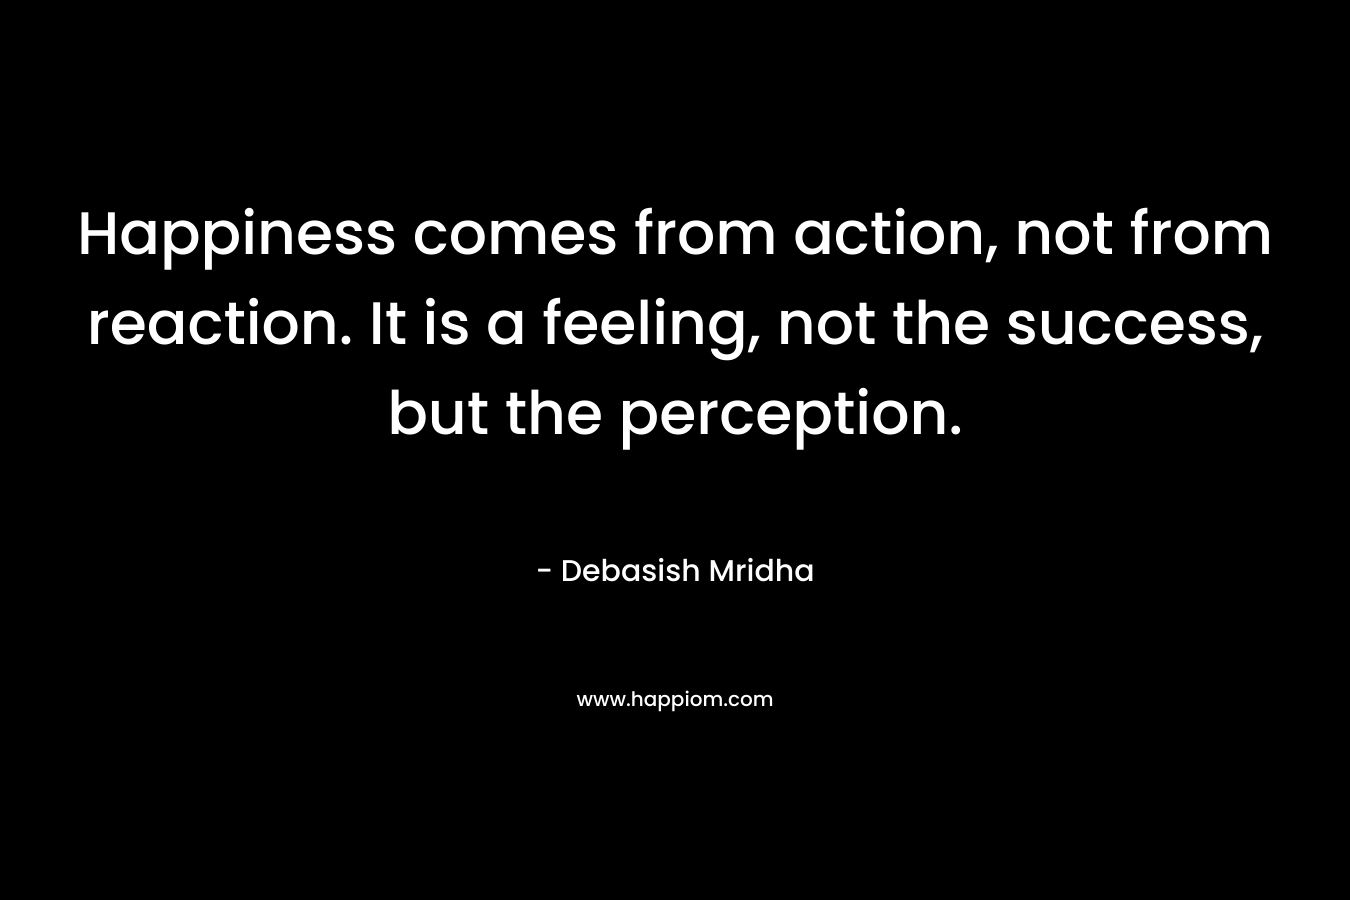 Happiness comes from action, not from reaction. It is a feeling, not the success, but the perception.